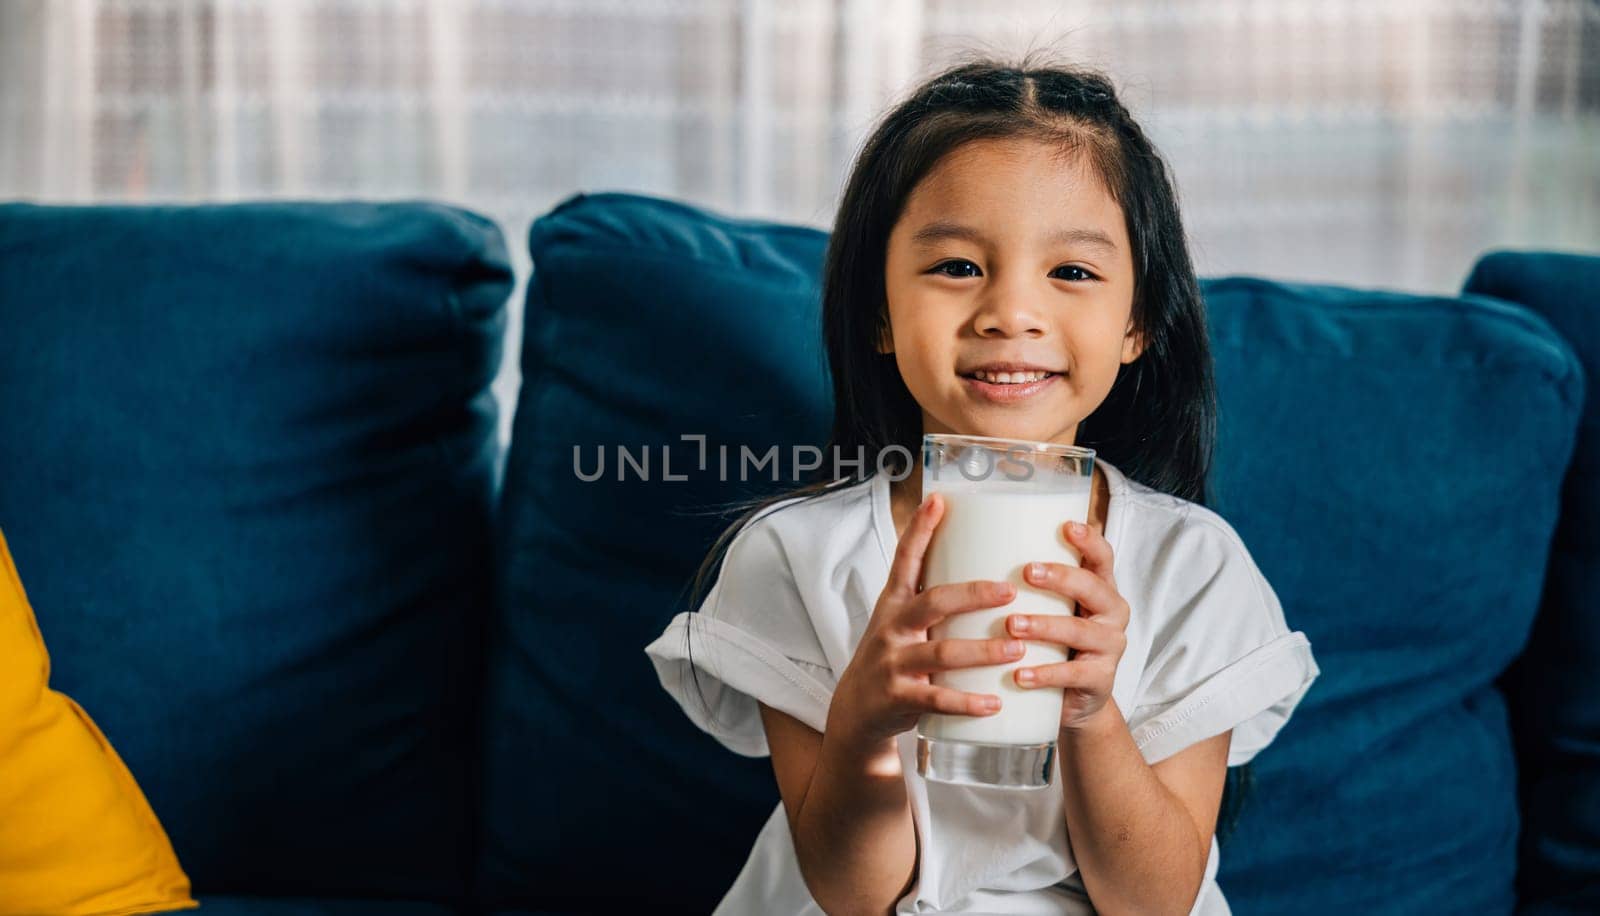 Asian child enjoys a glass of milk on the sofa their happiness and innocence shining through. This photo beautifully represents the significance of daily health care and proper nutrition for children.